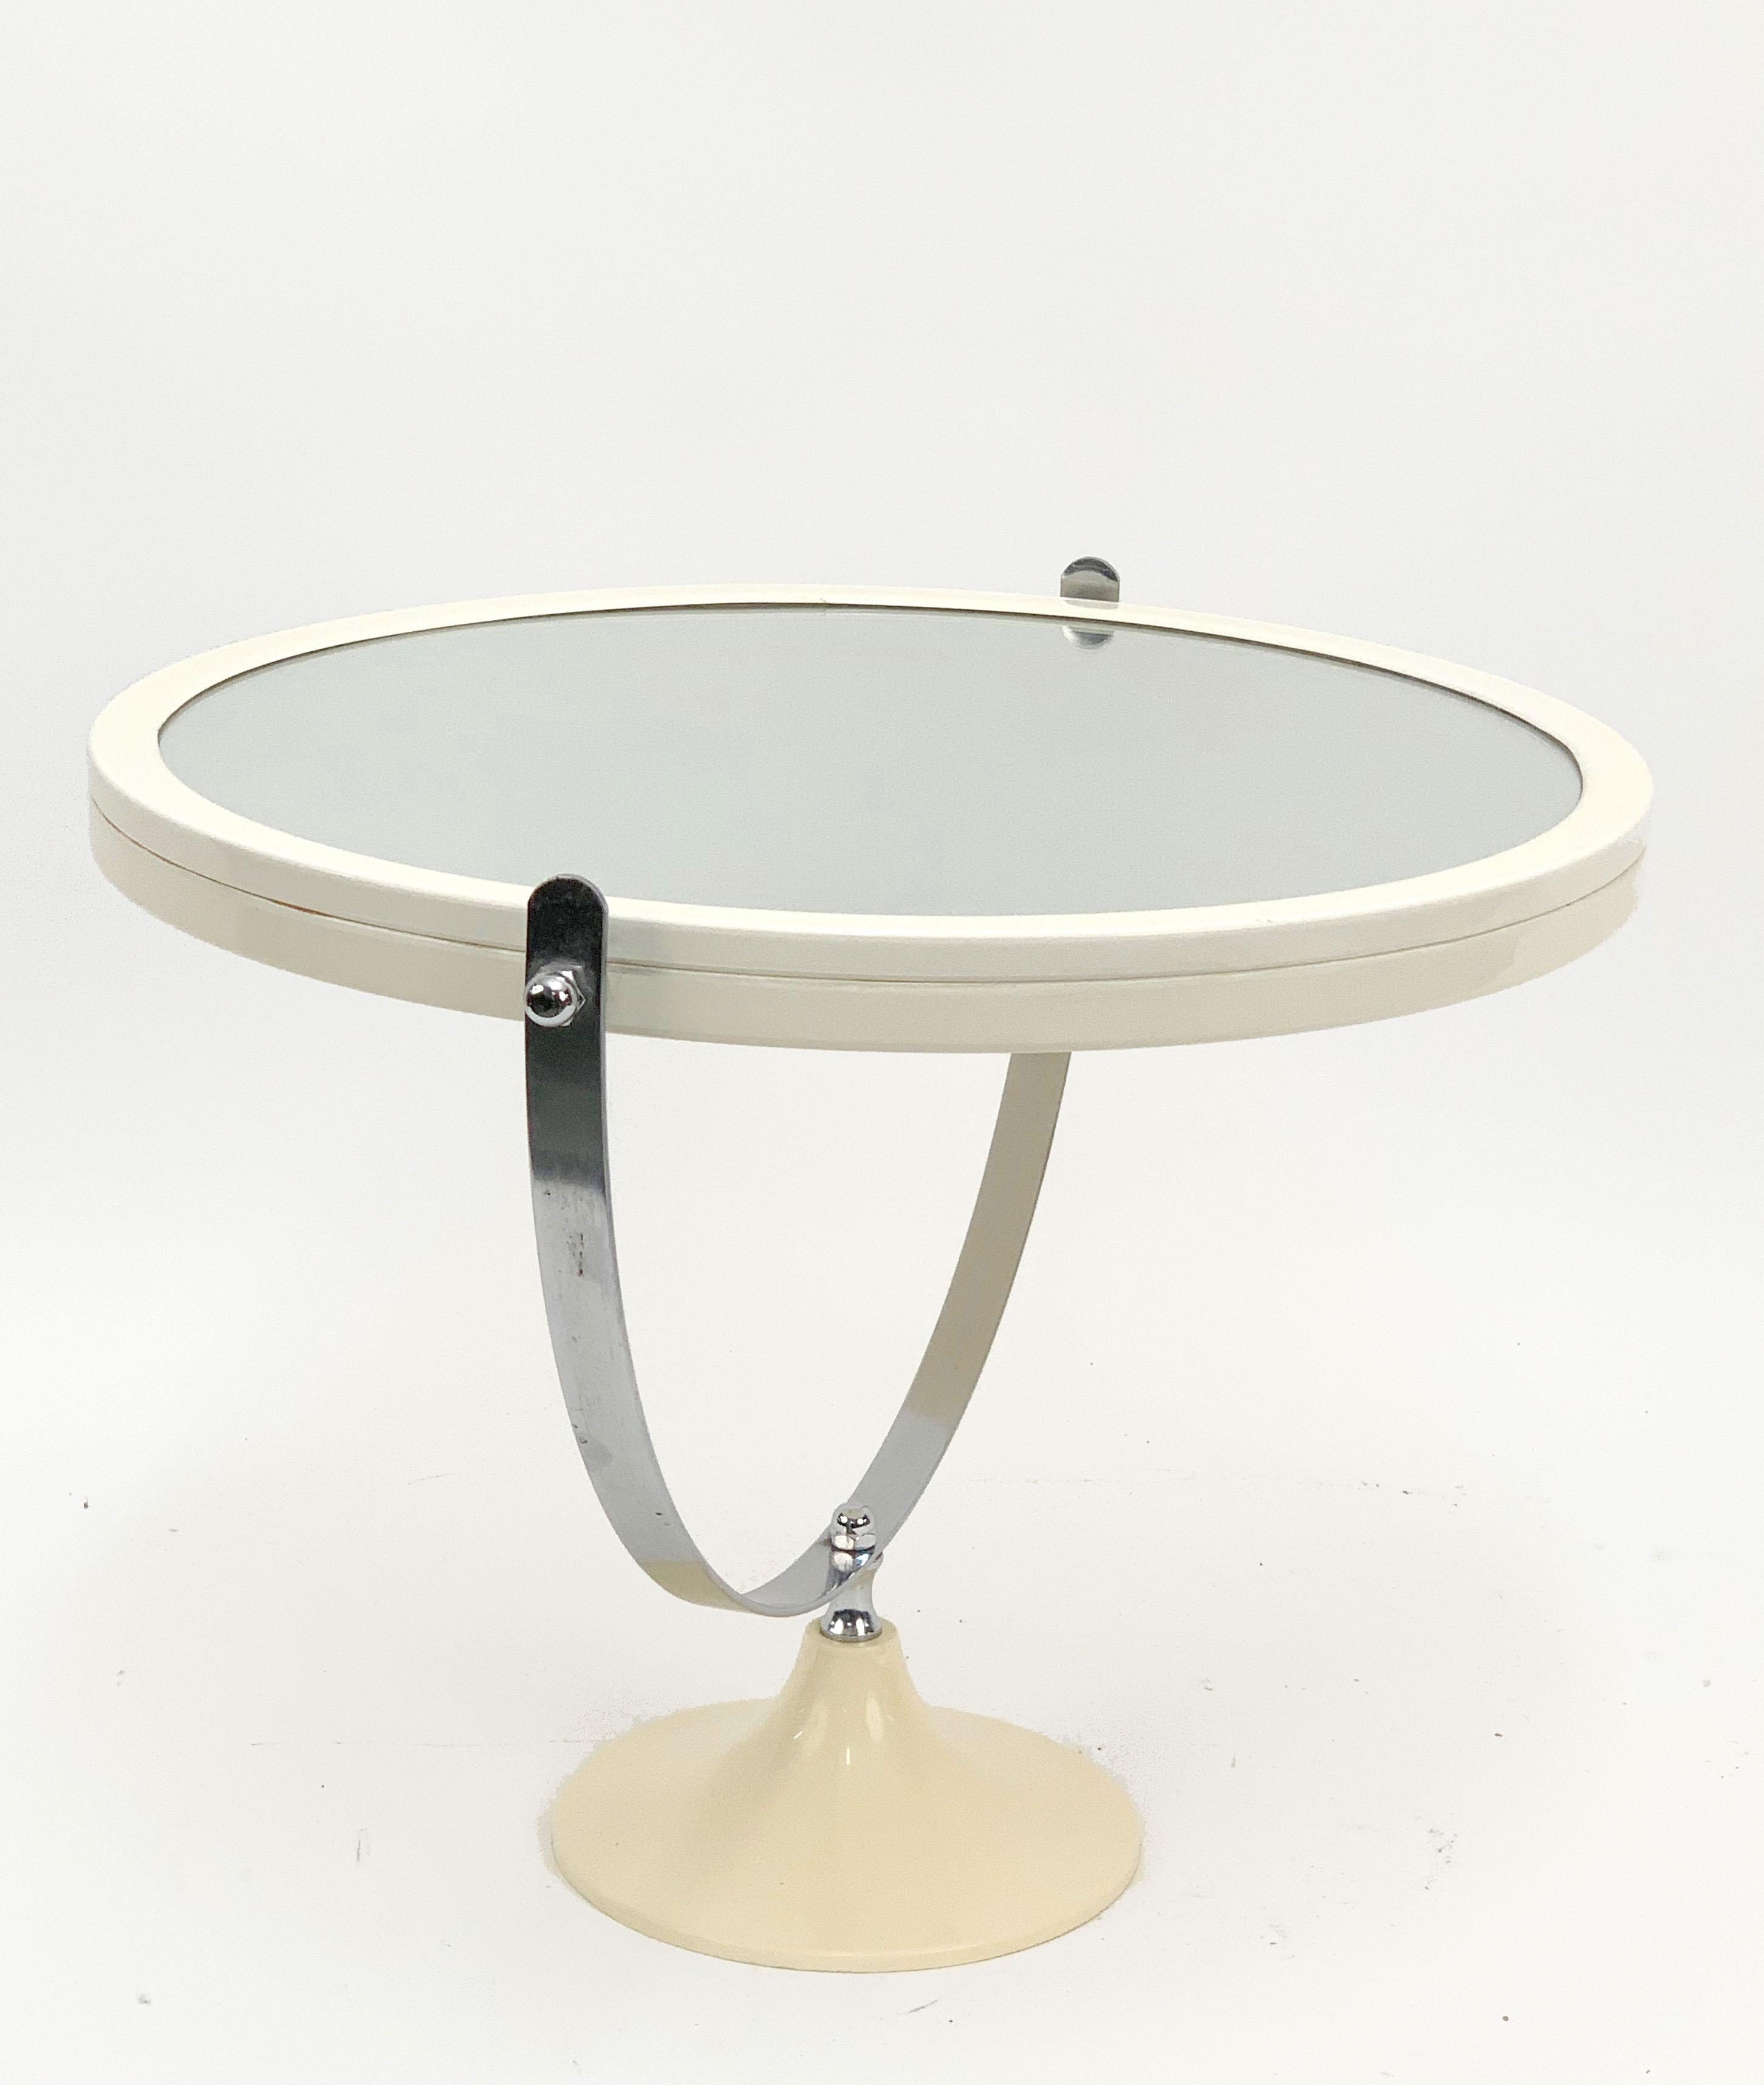 Midcentury Metal and White Plastic Round Italian Table Mirror, Italy, 1980s For Sale 2